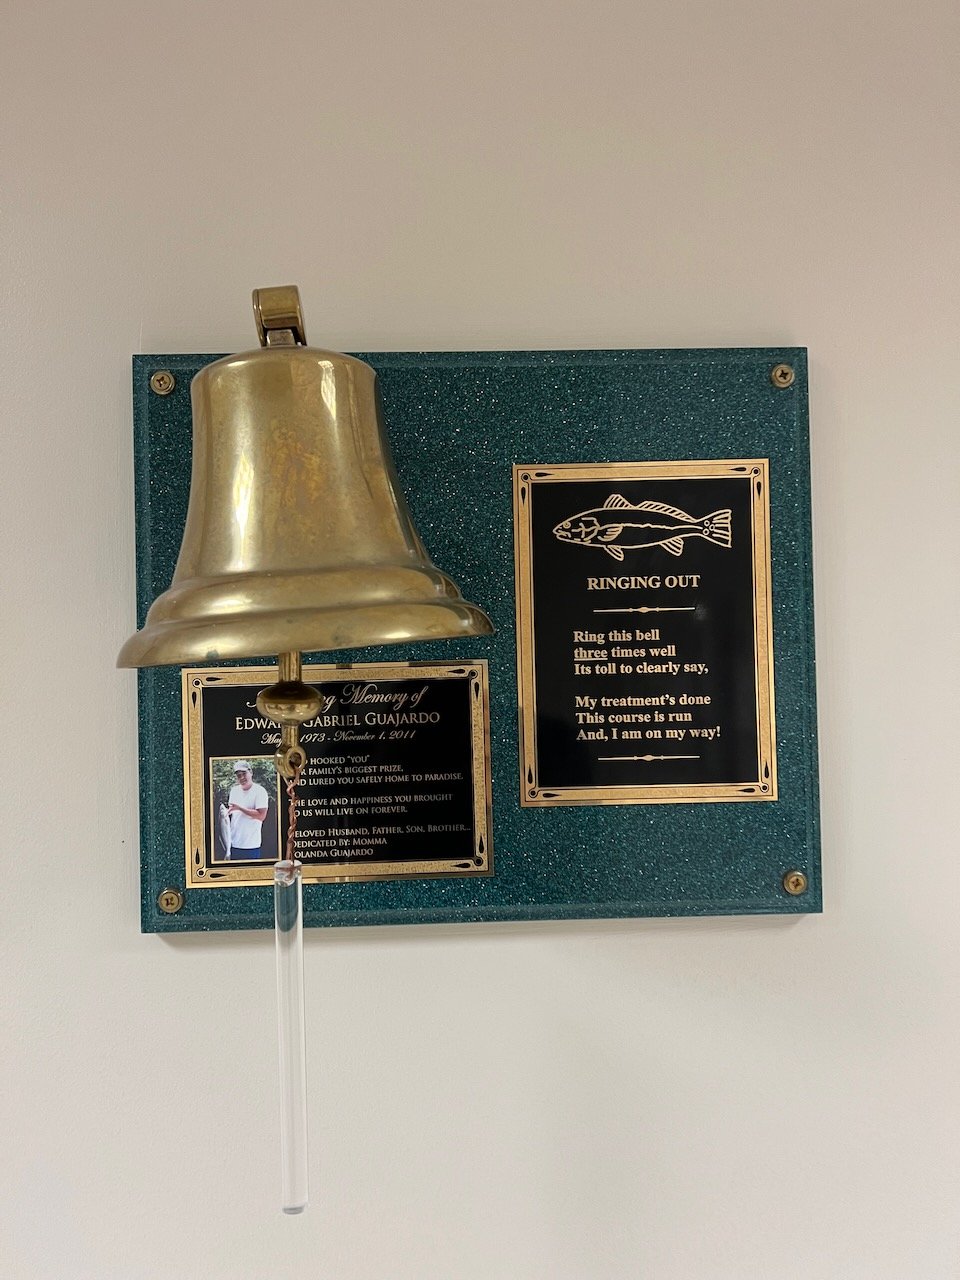 MD Anderson Radiation Bell